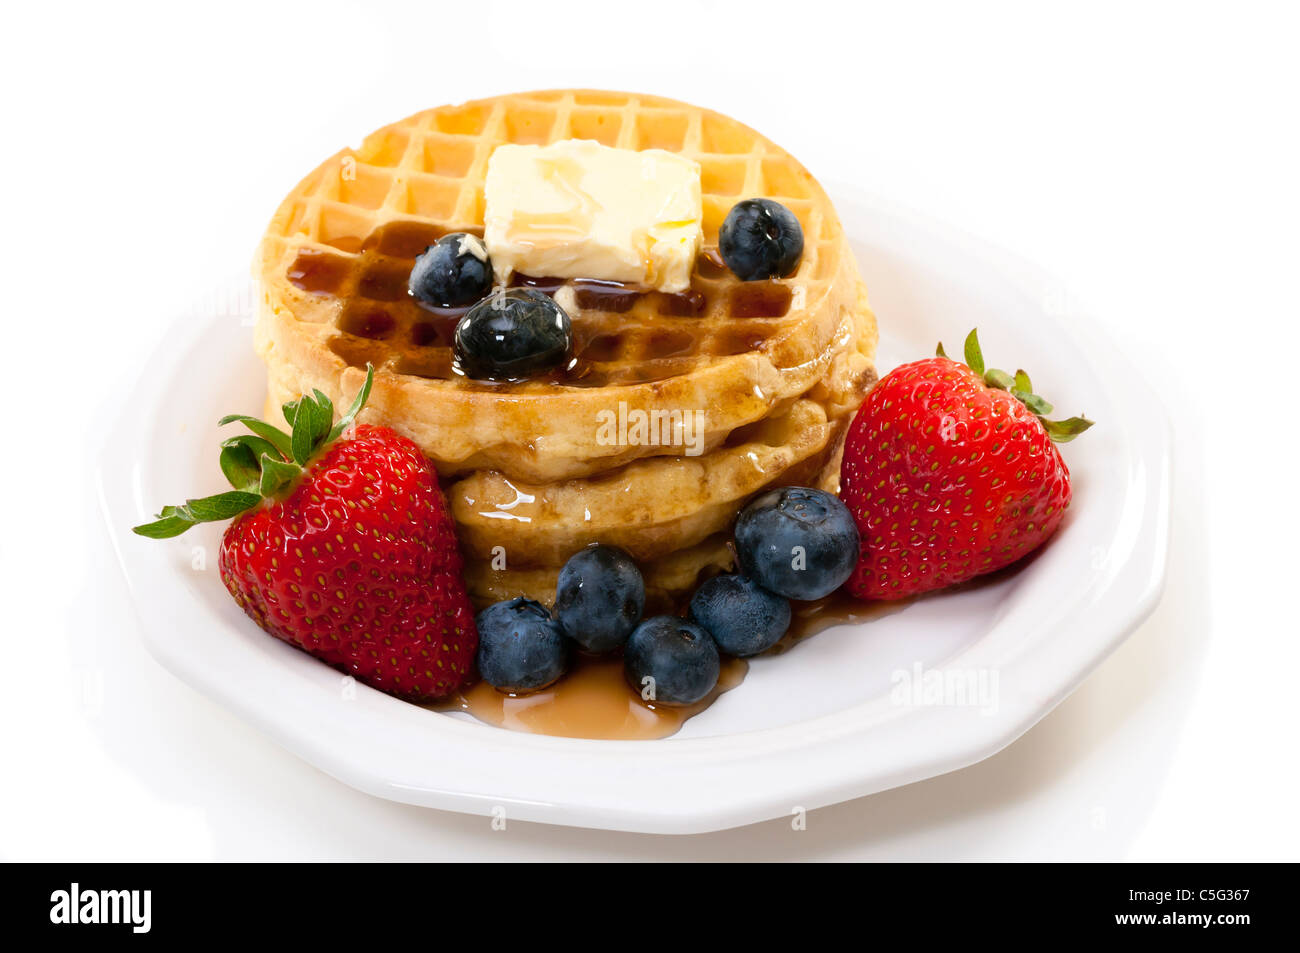 Waffles, strawberries, blueberries, and butter.   Isolated on white background. Stock Photo